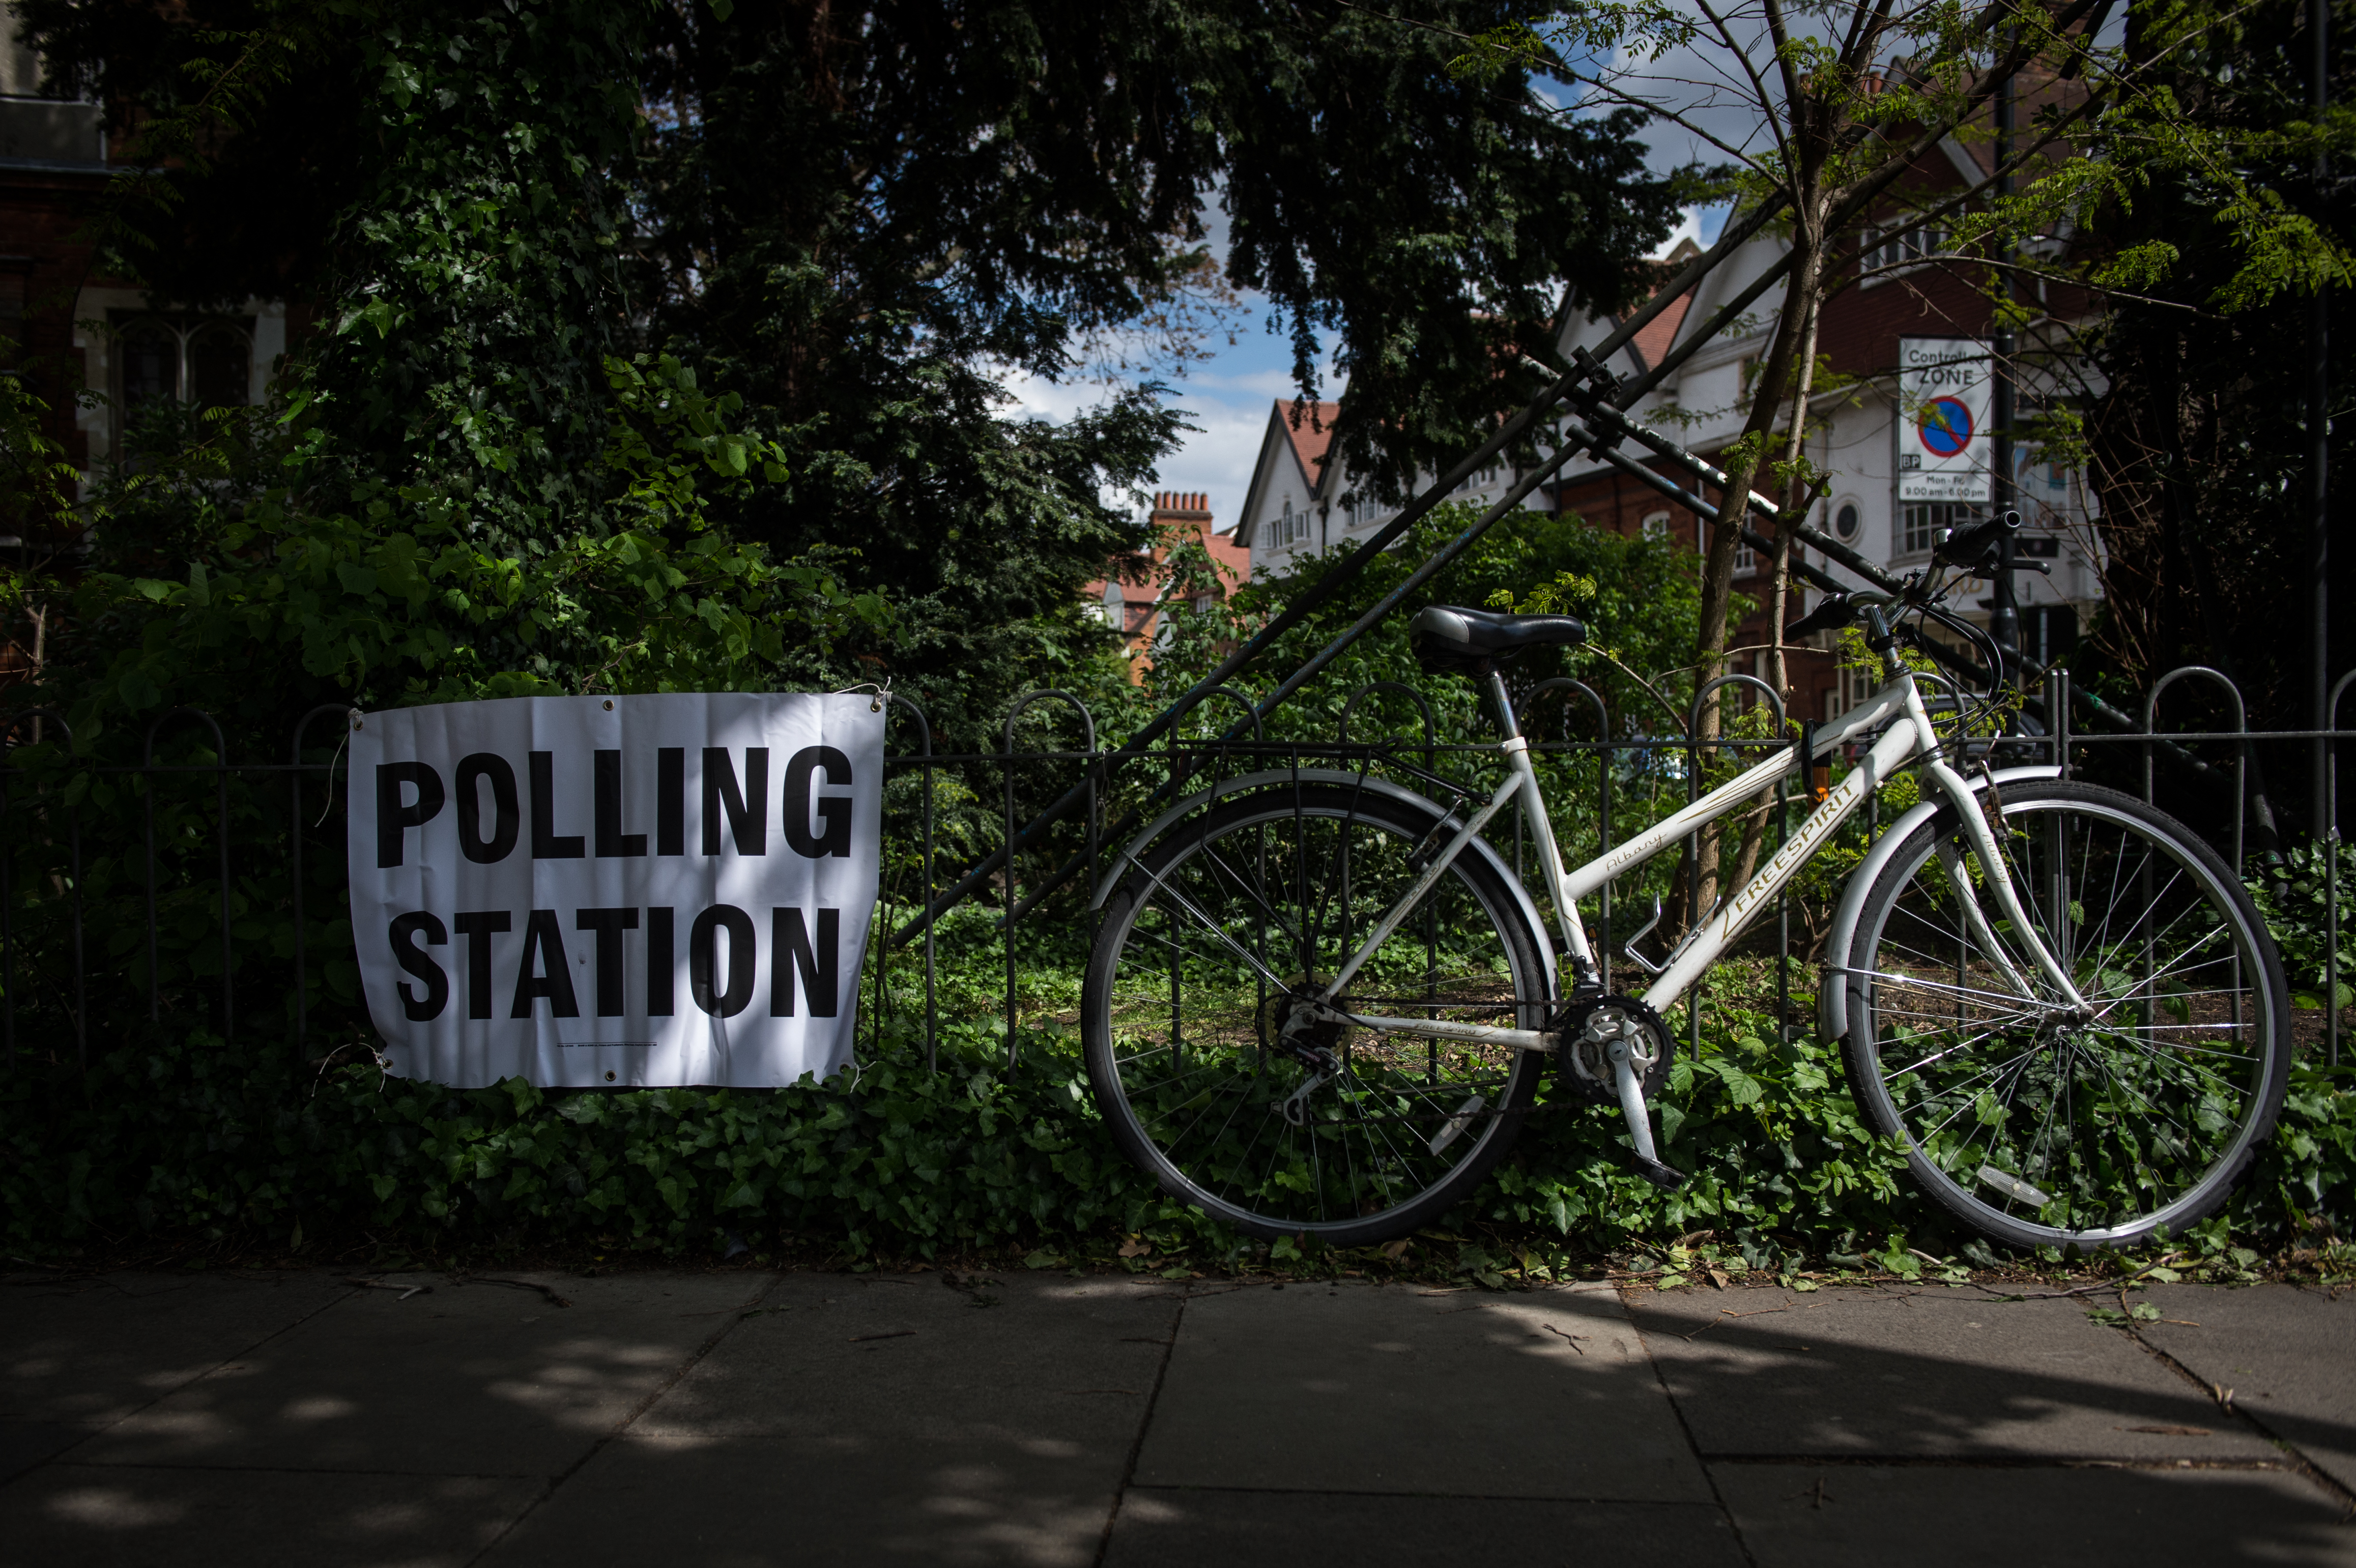 A bicycle outside a polling station